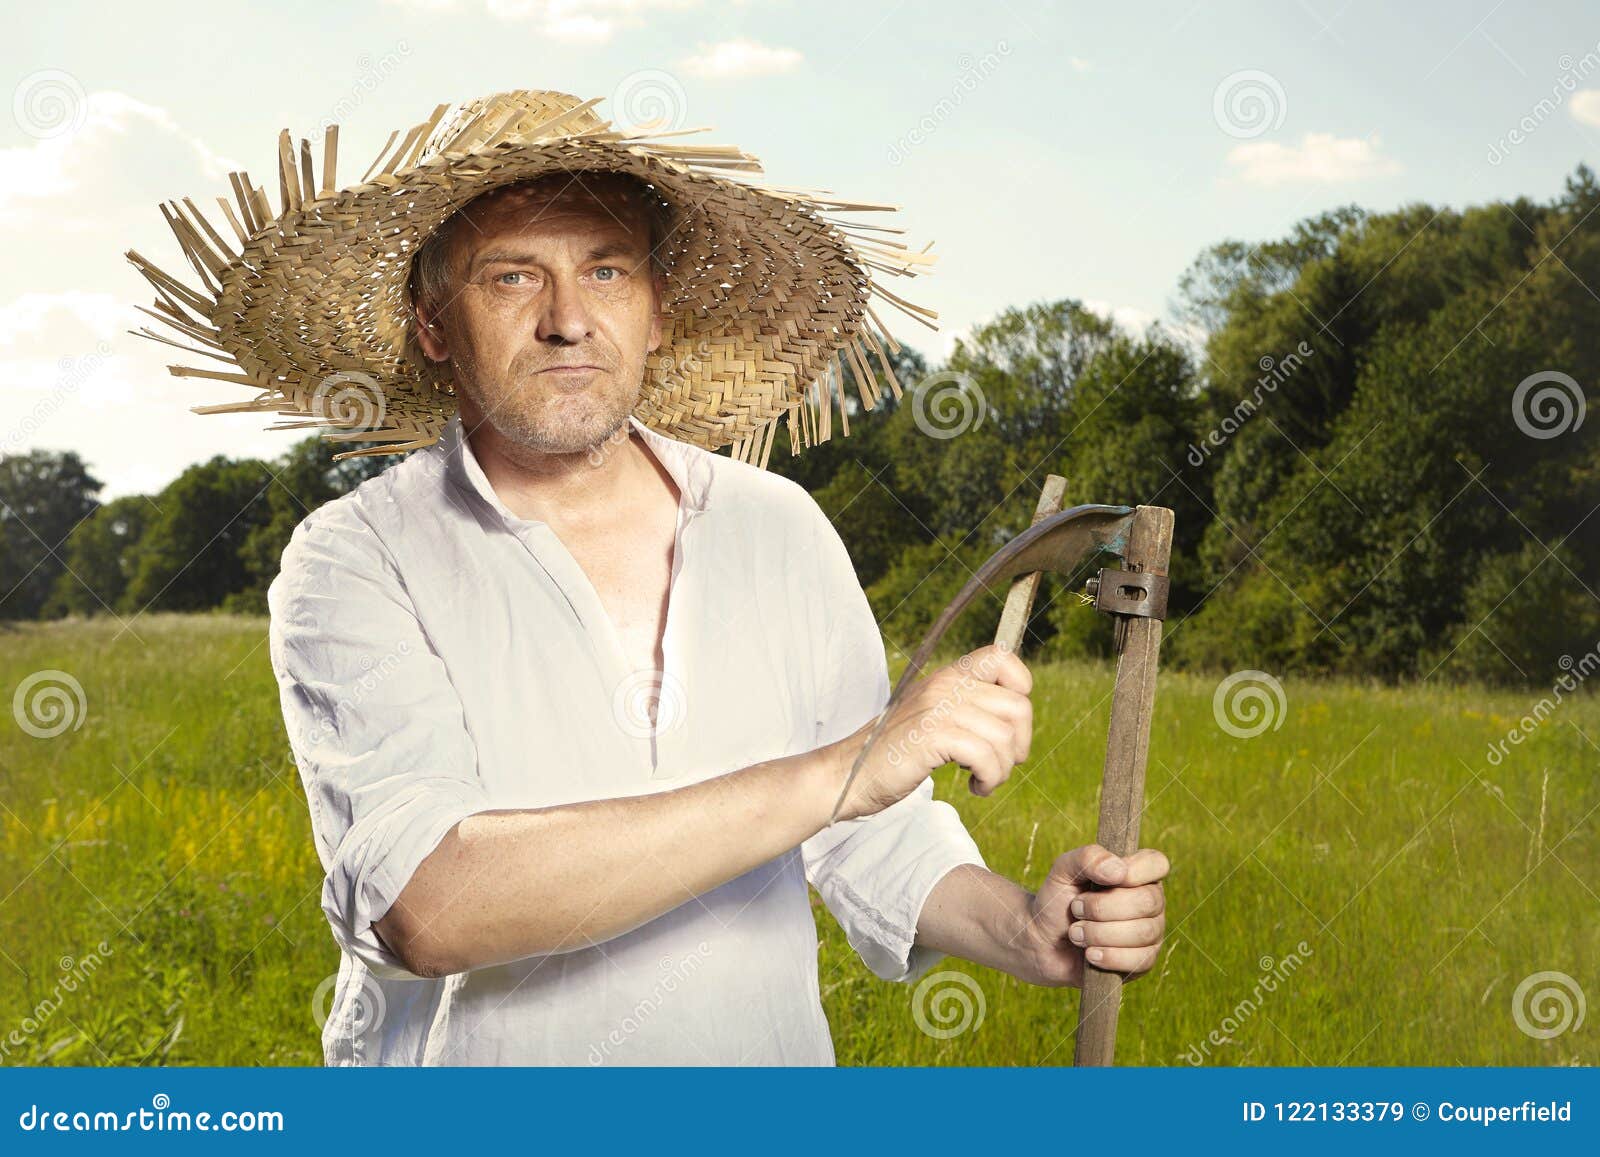 Country Man in Straw Hat Mowing Grass in Sunny Day Stock Image